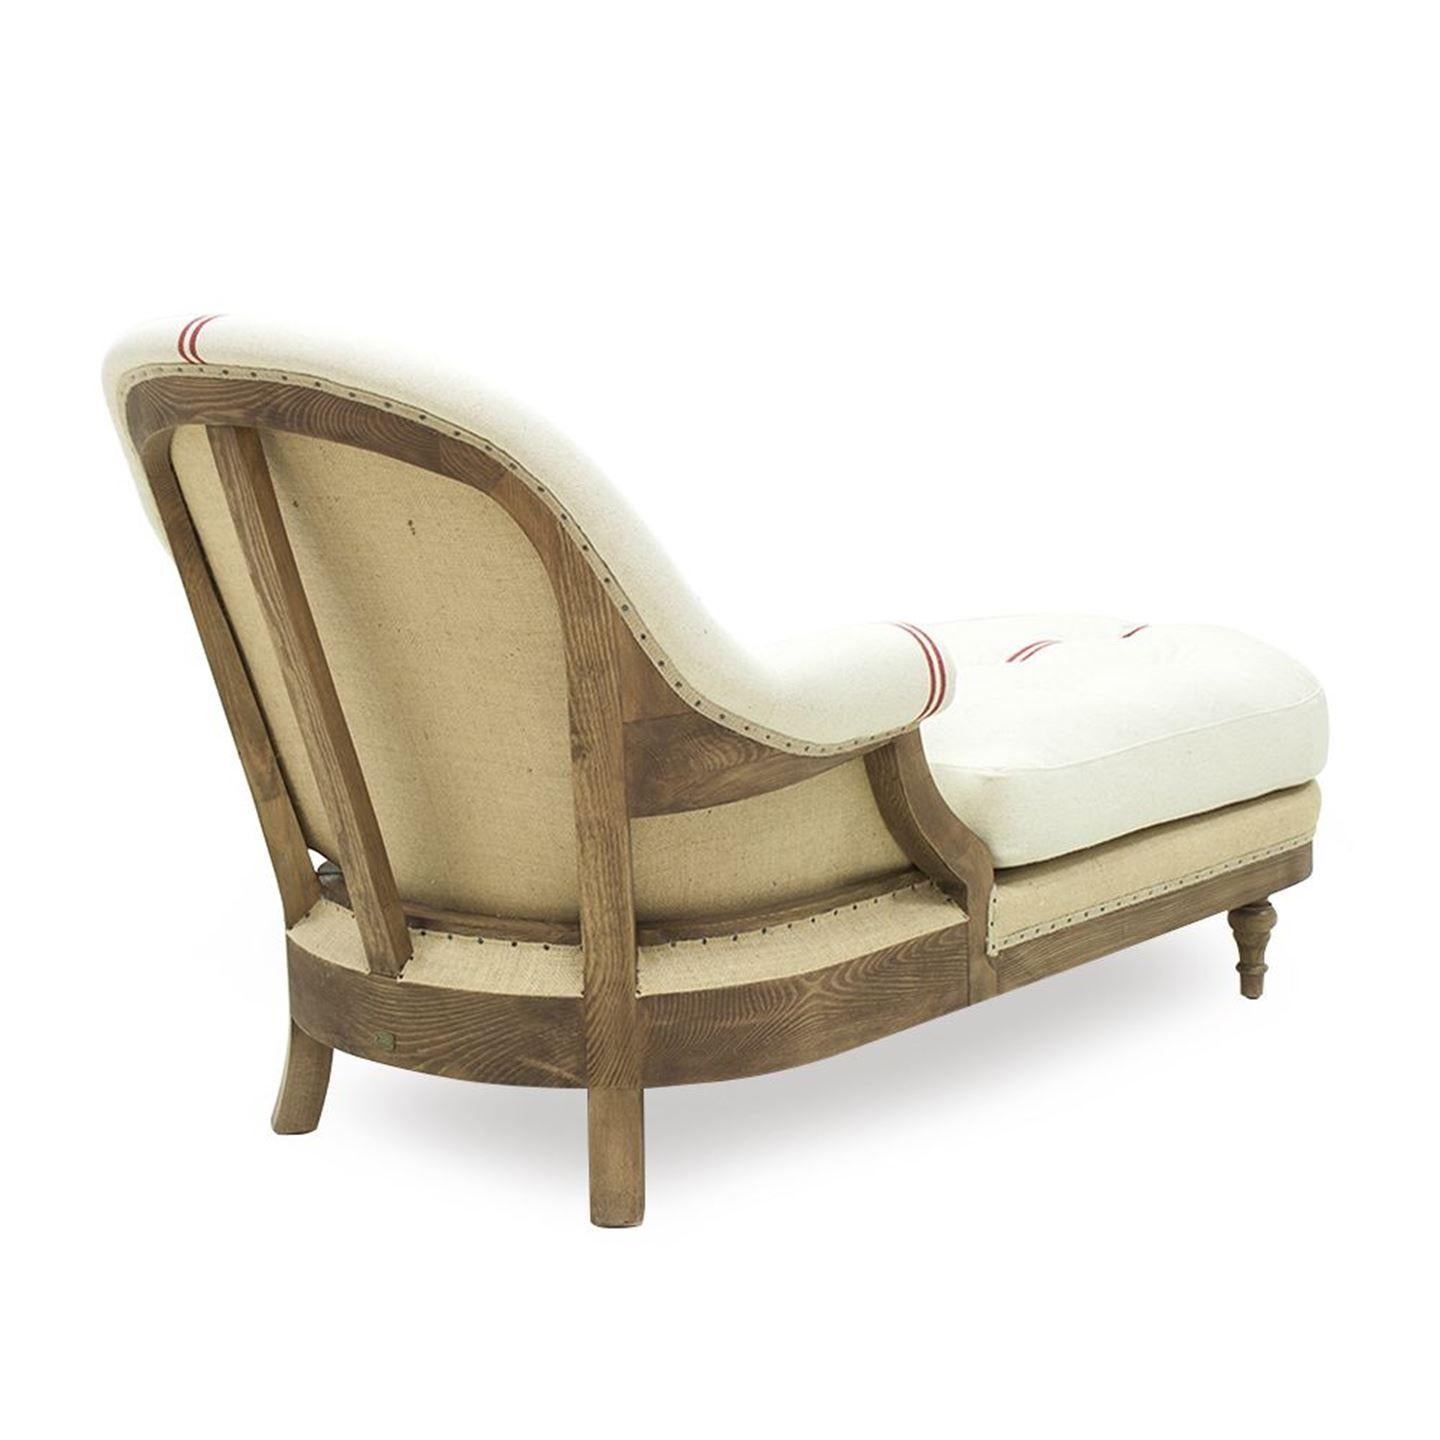 French Provincial Style Chaise Lounge with Custom Natural Finishes For Sale 8